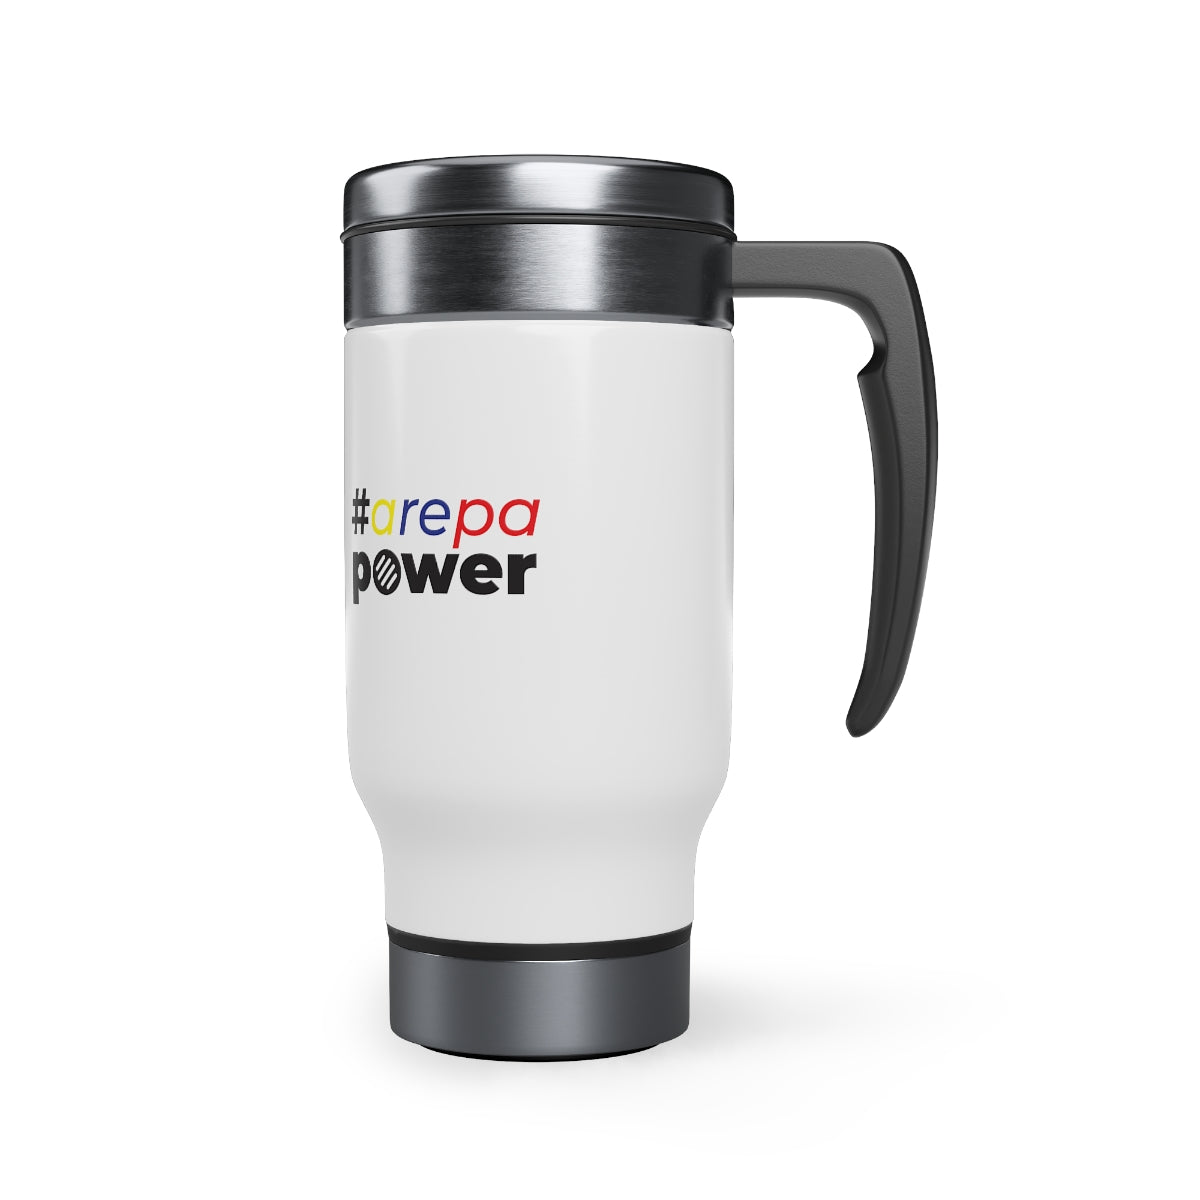 #arepapower - Tricolor - Stainless Steel Travel Mug with Handle, 14oz